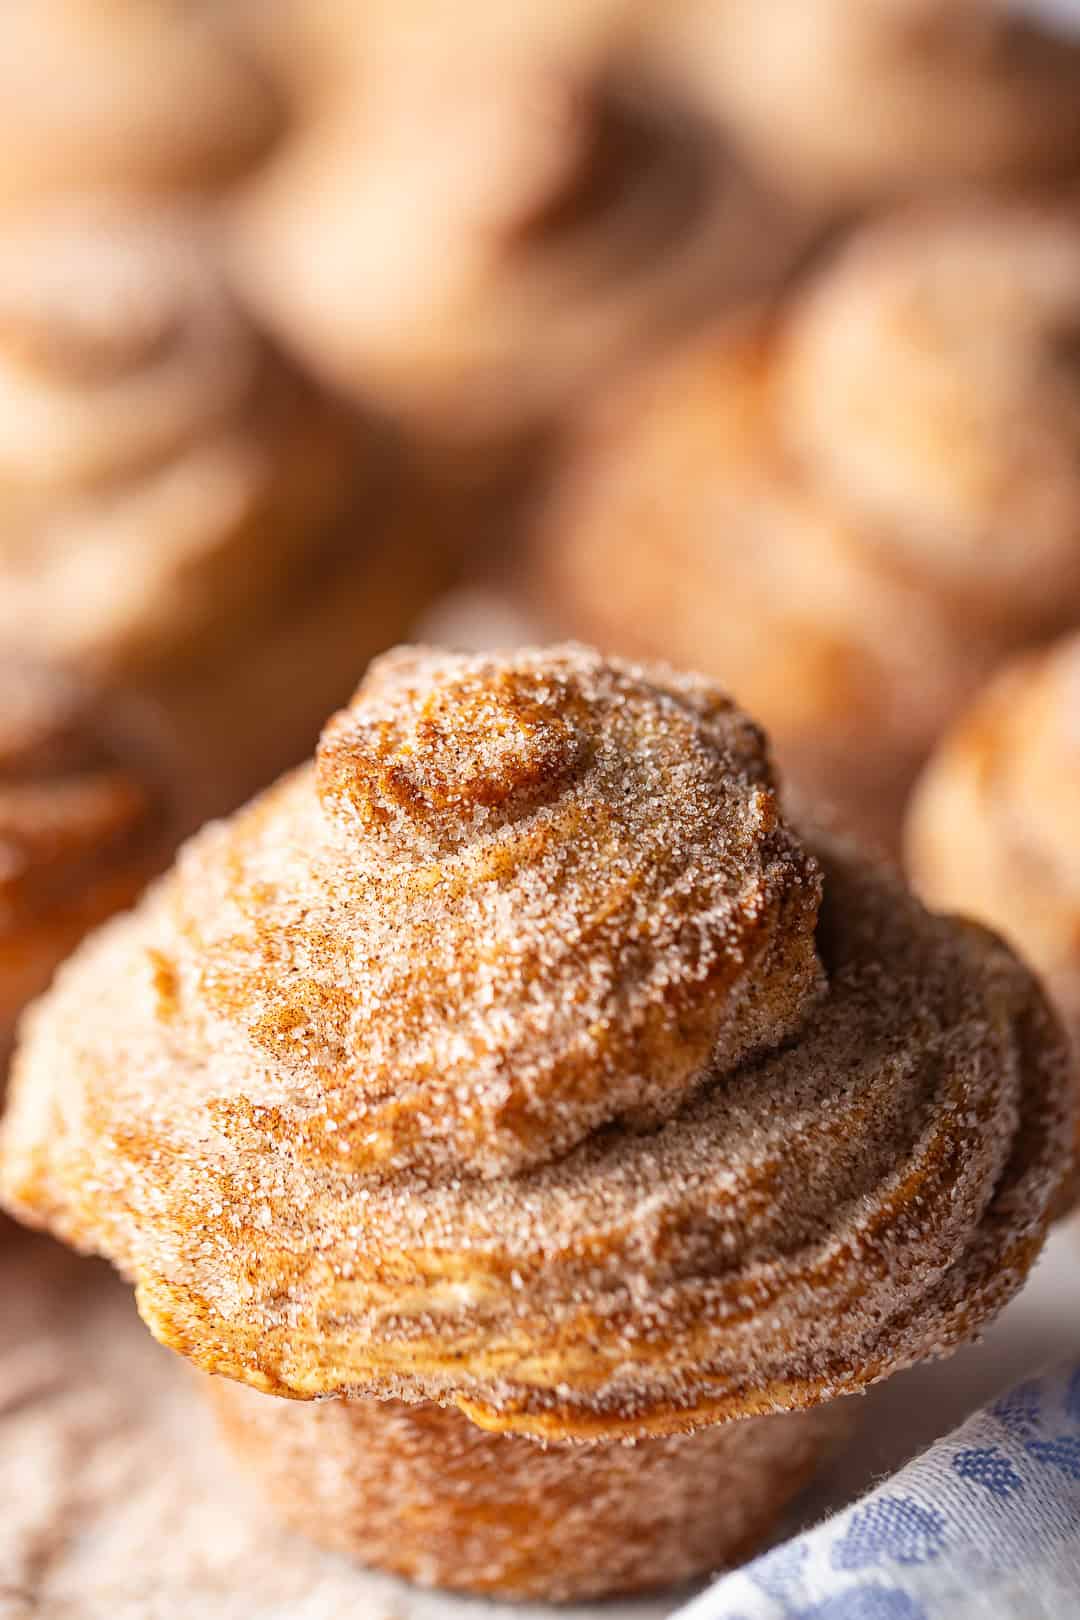 Cruffin recipe baked and coated in cinnamon sugar.